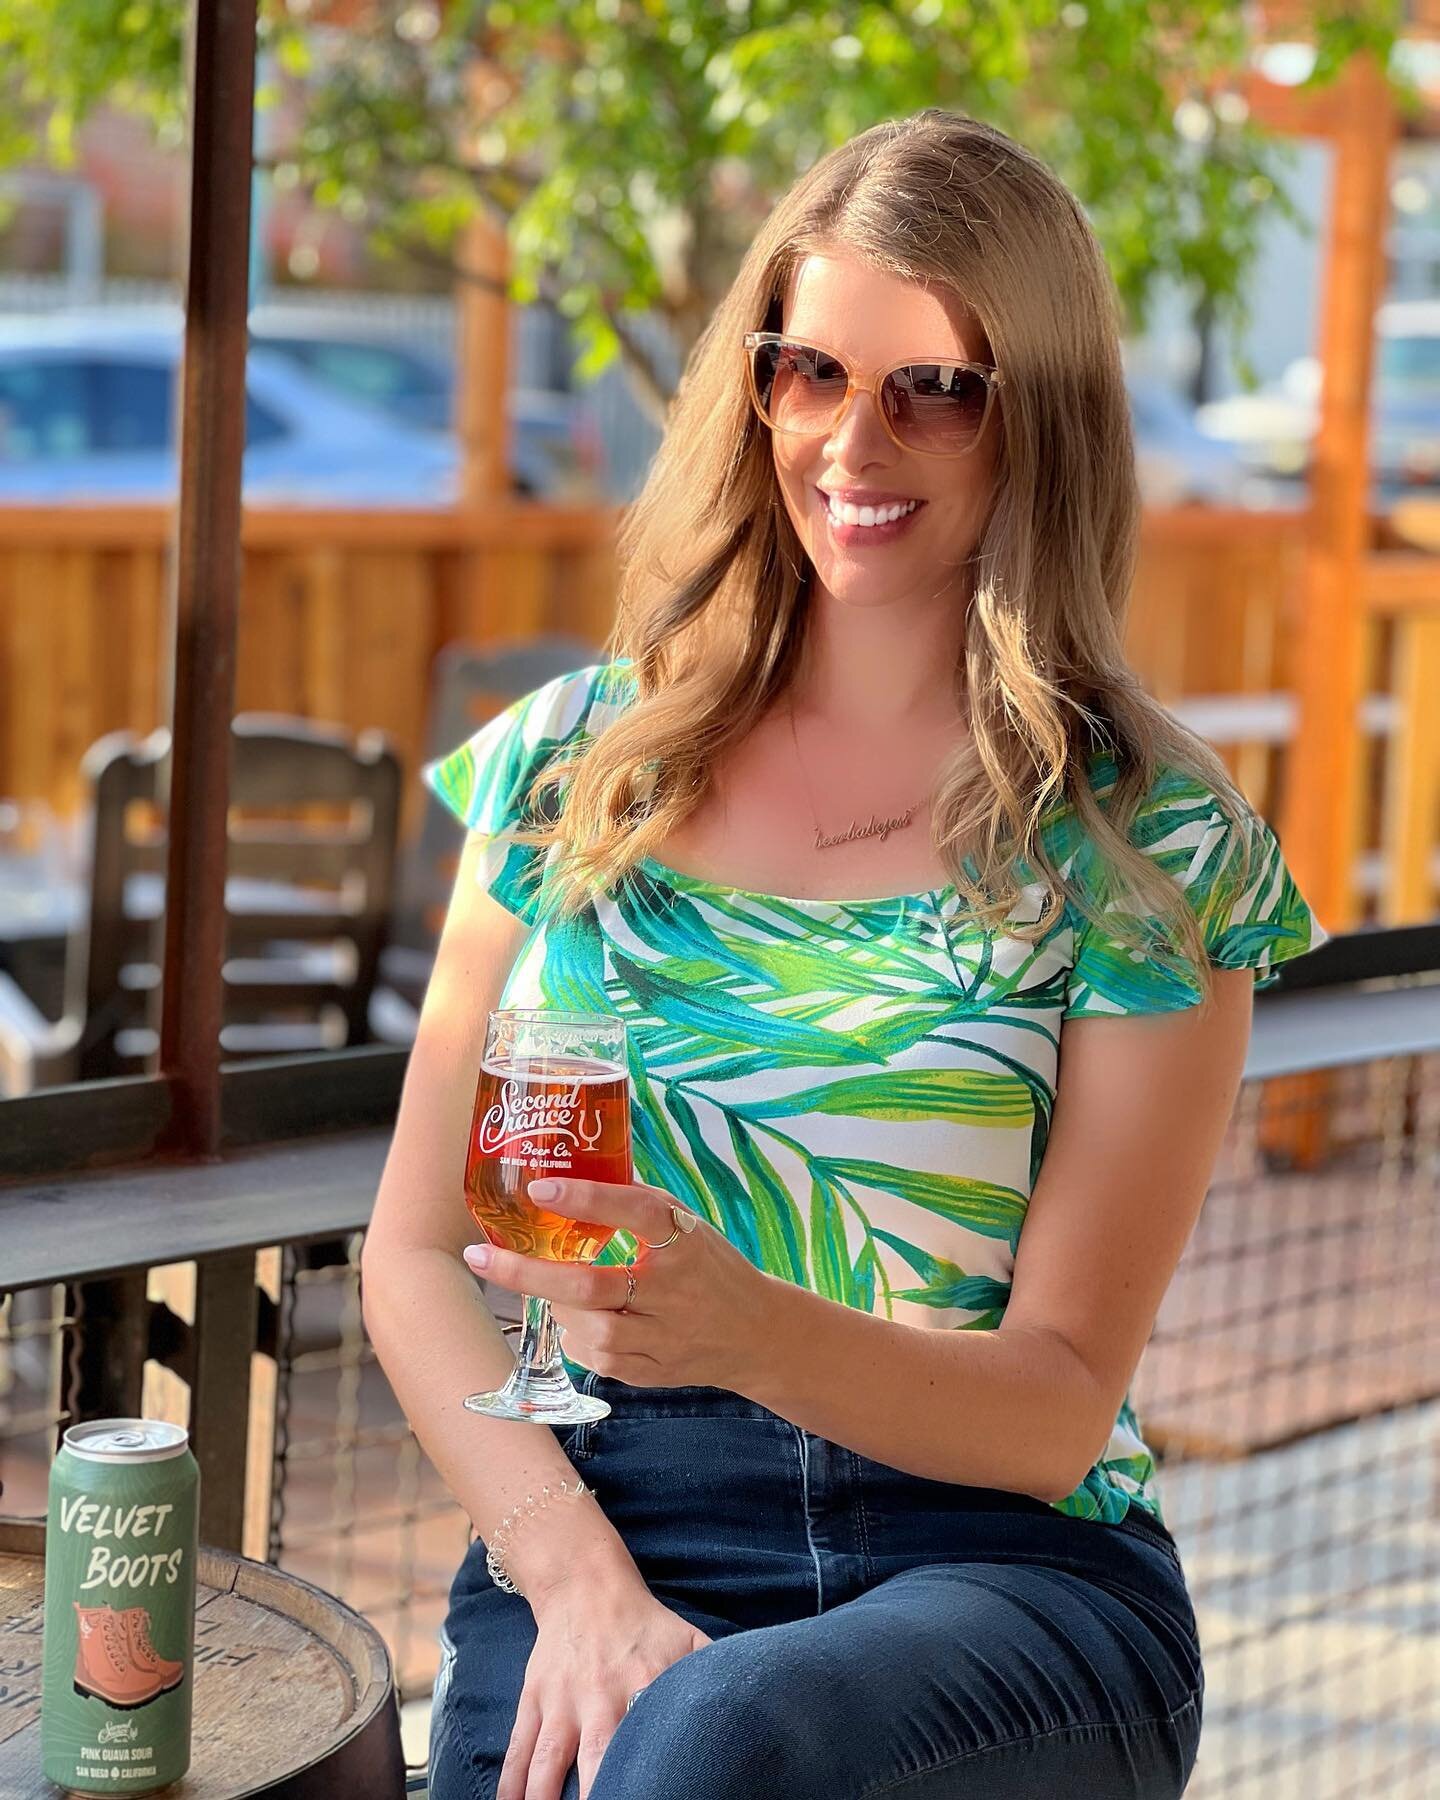 These boots are made for drinkin&rsquo; 
👢👢 

Last month, @secondchancebeer hosted the Pink Boots San Diego members and friends to brew Velvet Boots, a pink guava sour coming in at 5%. 

Proceeds from this pretty pink beer support the Pink Boots so